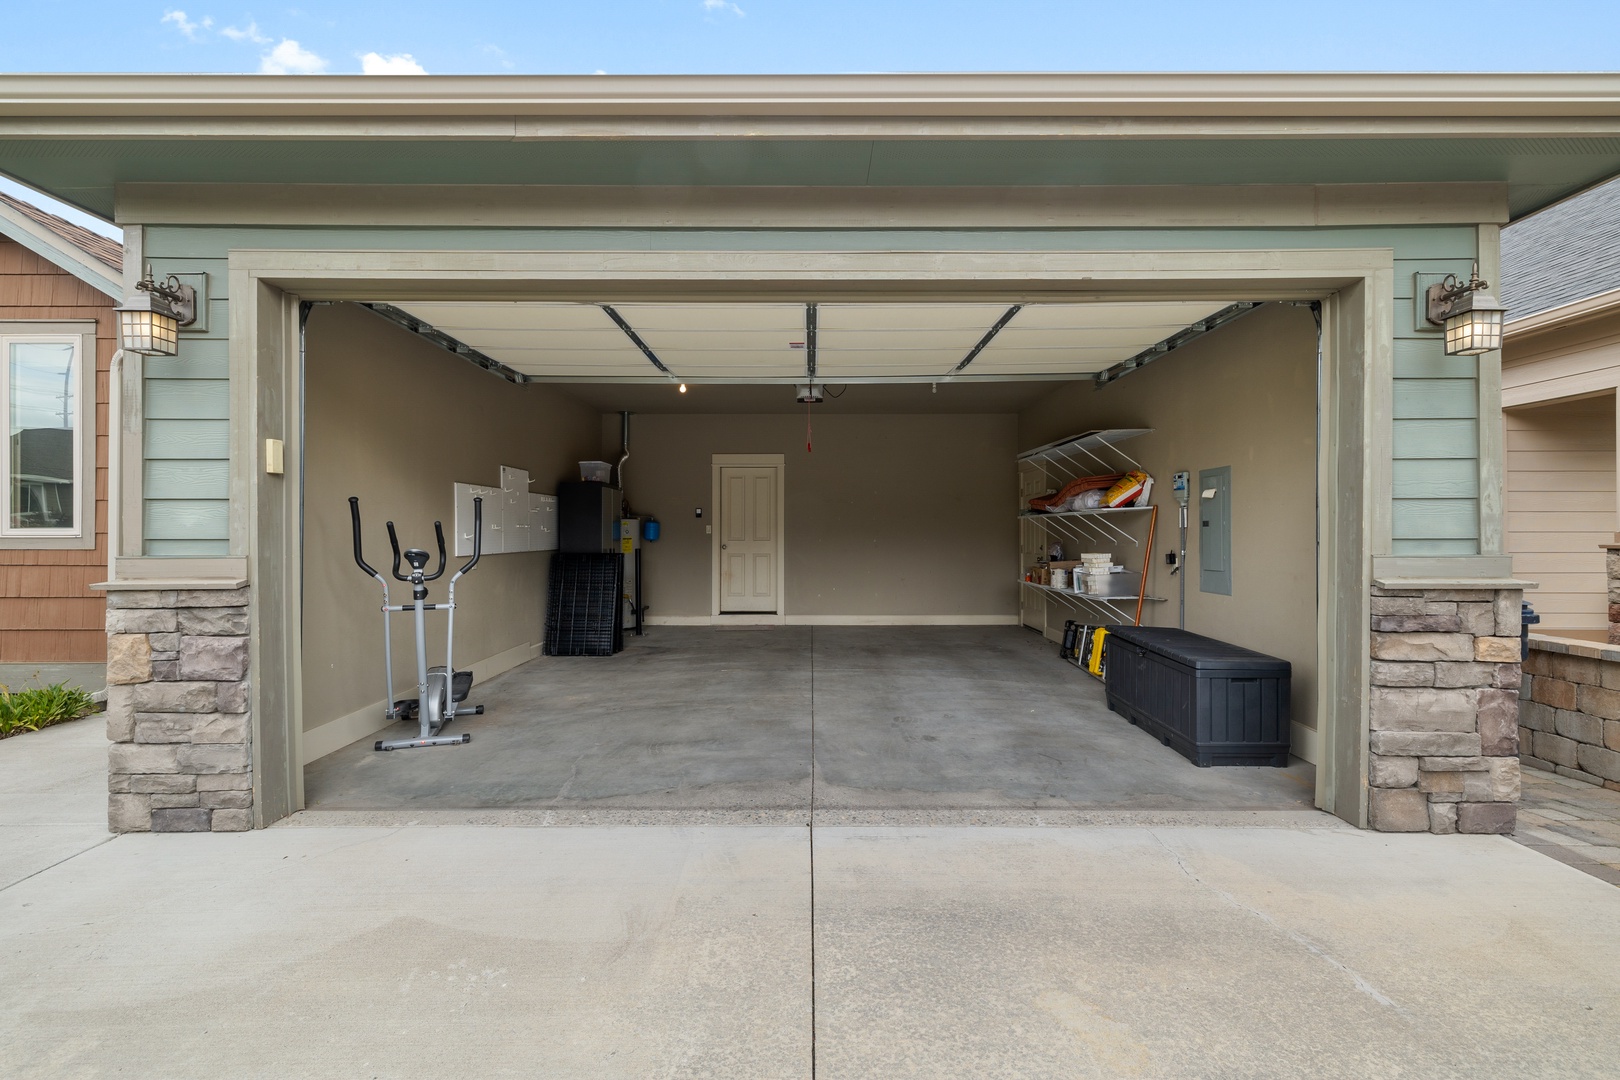 This home offers parking for up to 3 vehicles between the driveway & garage